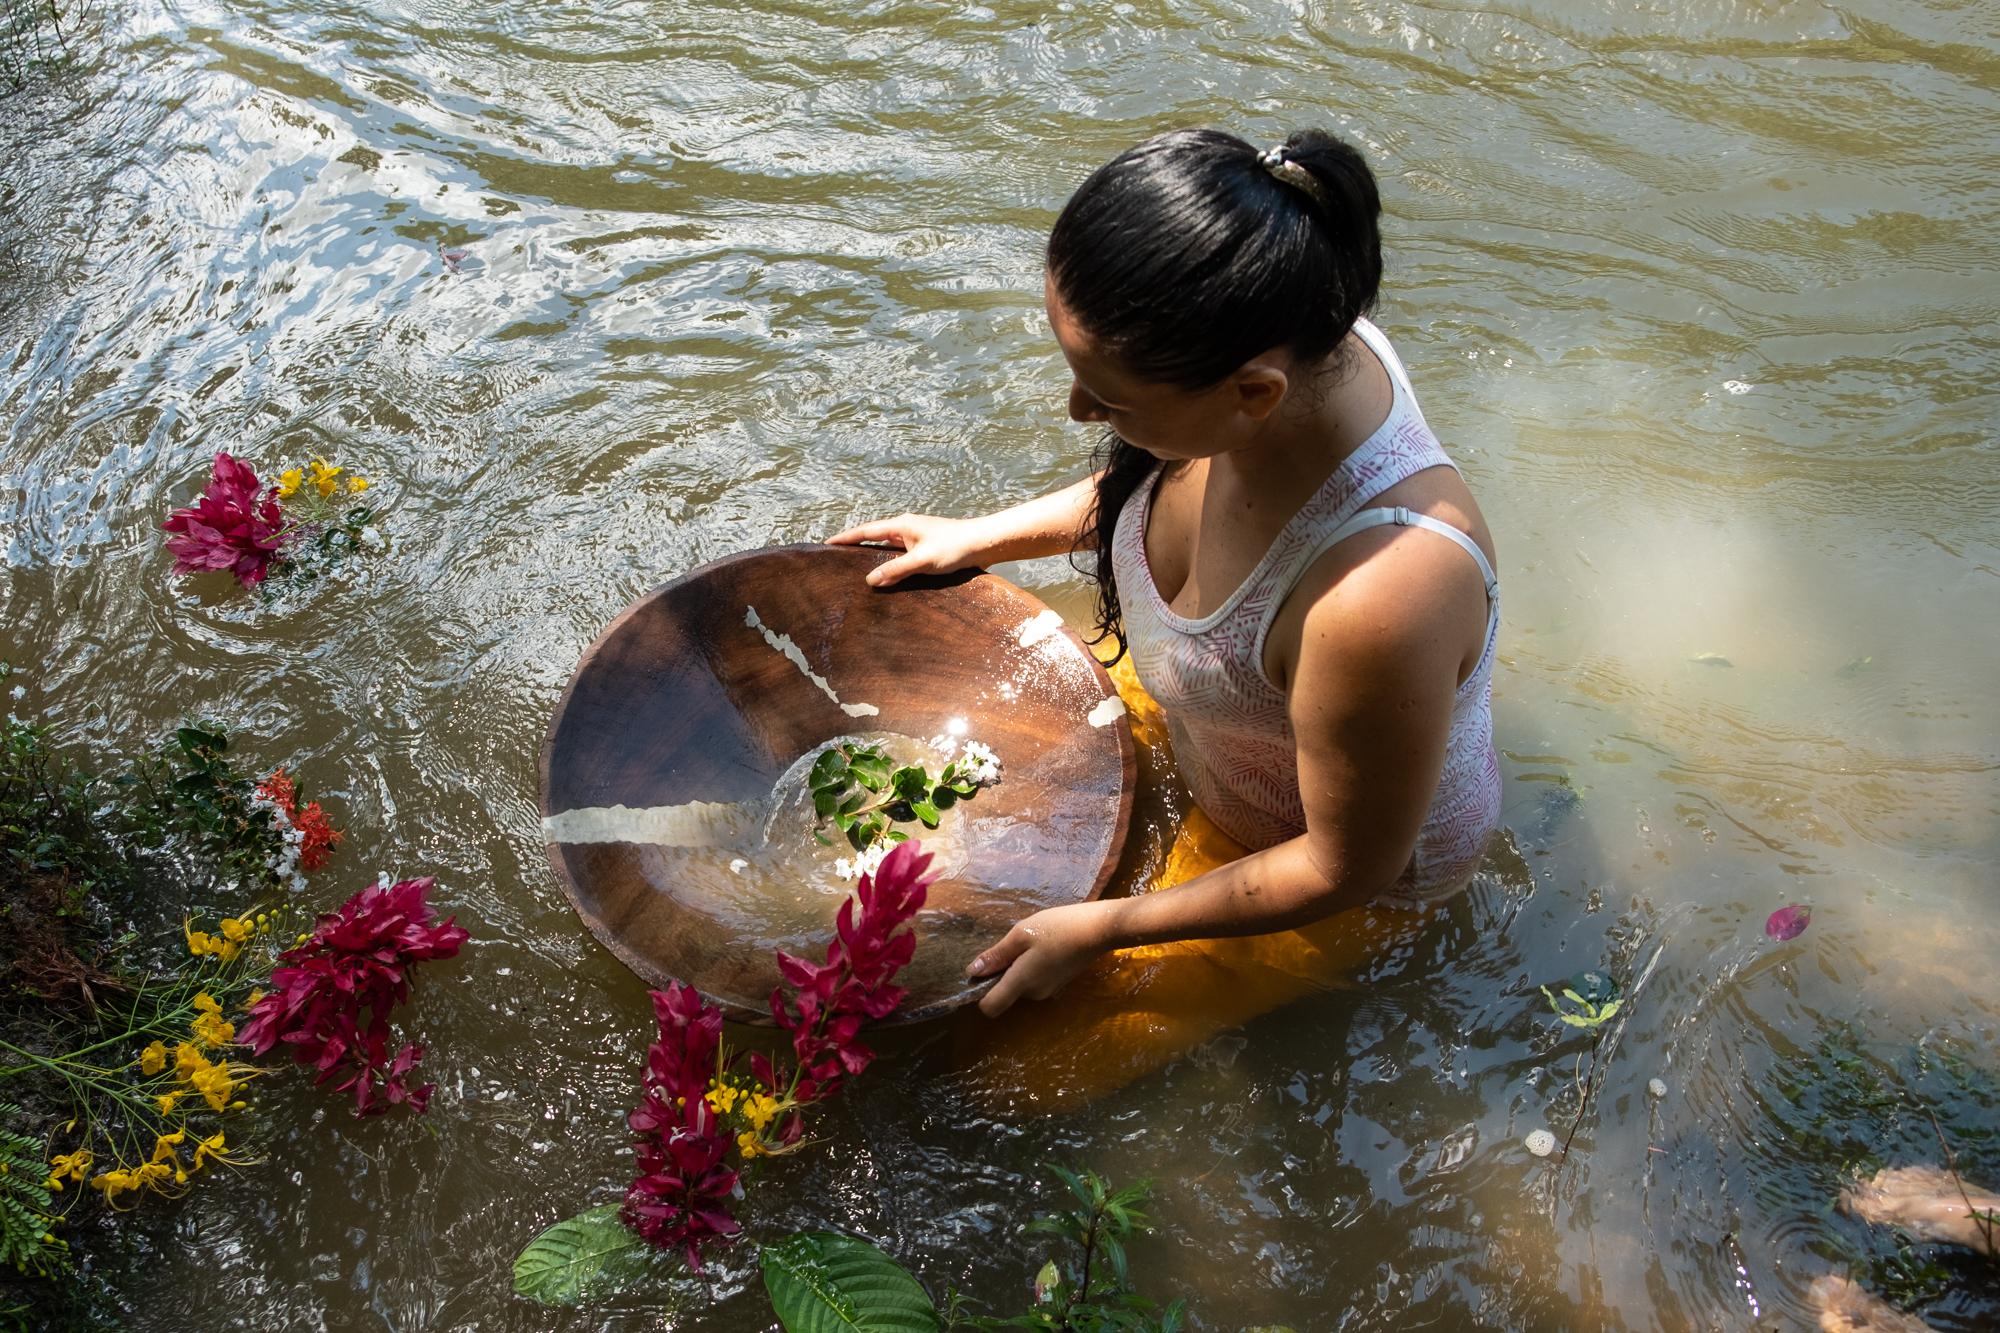 Samaná: the last free river - Milena Ruiz is a mother of three and one of the few women...